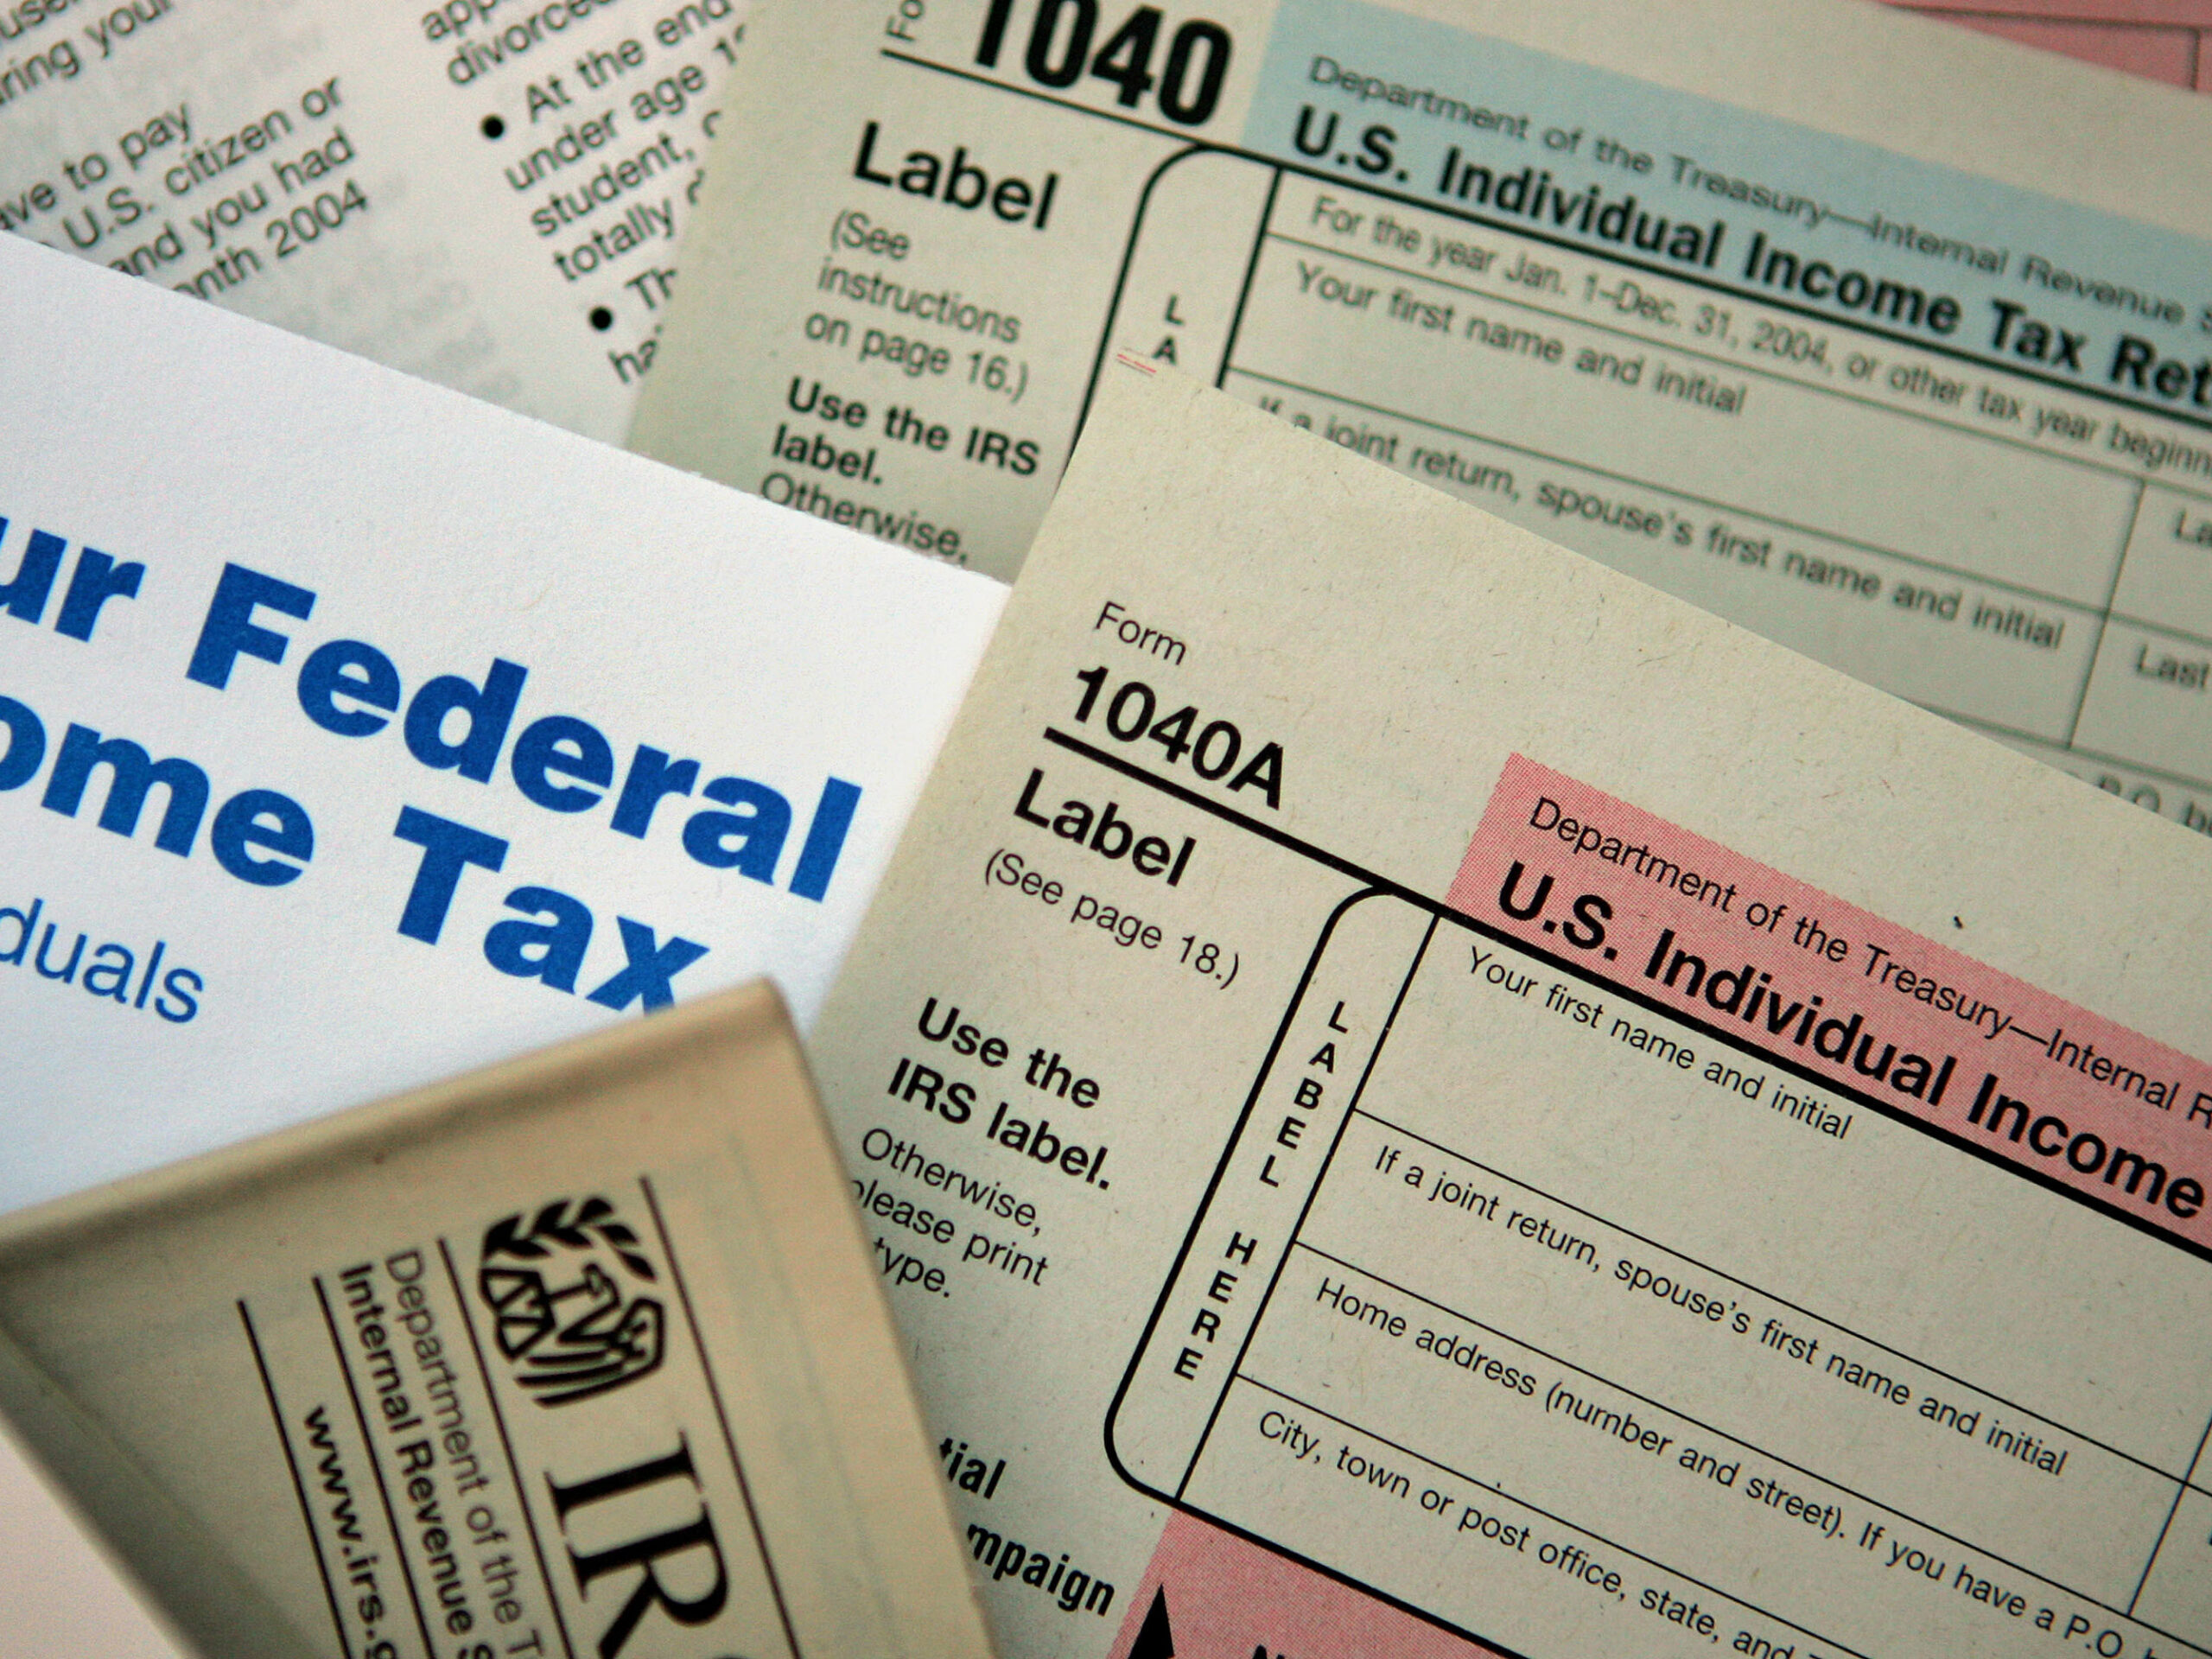 Five things to know as the tax deadline looms